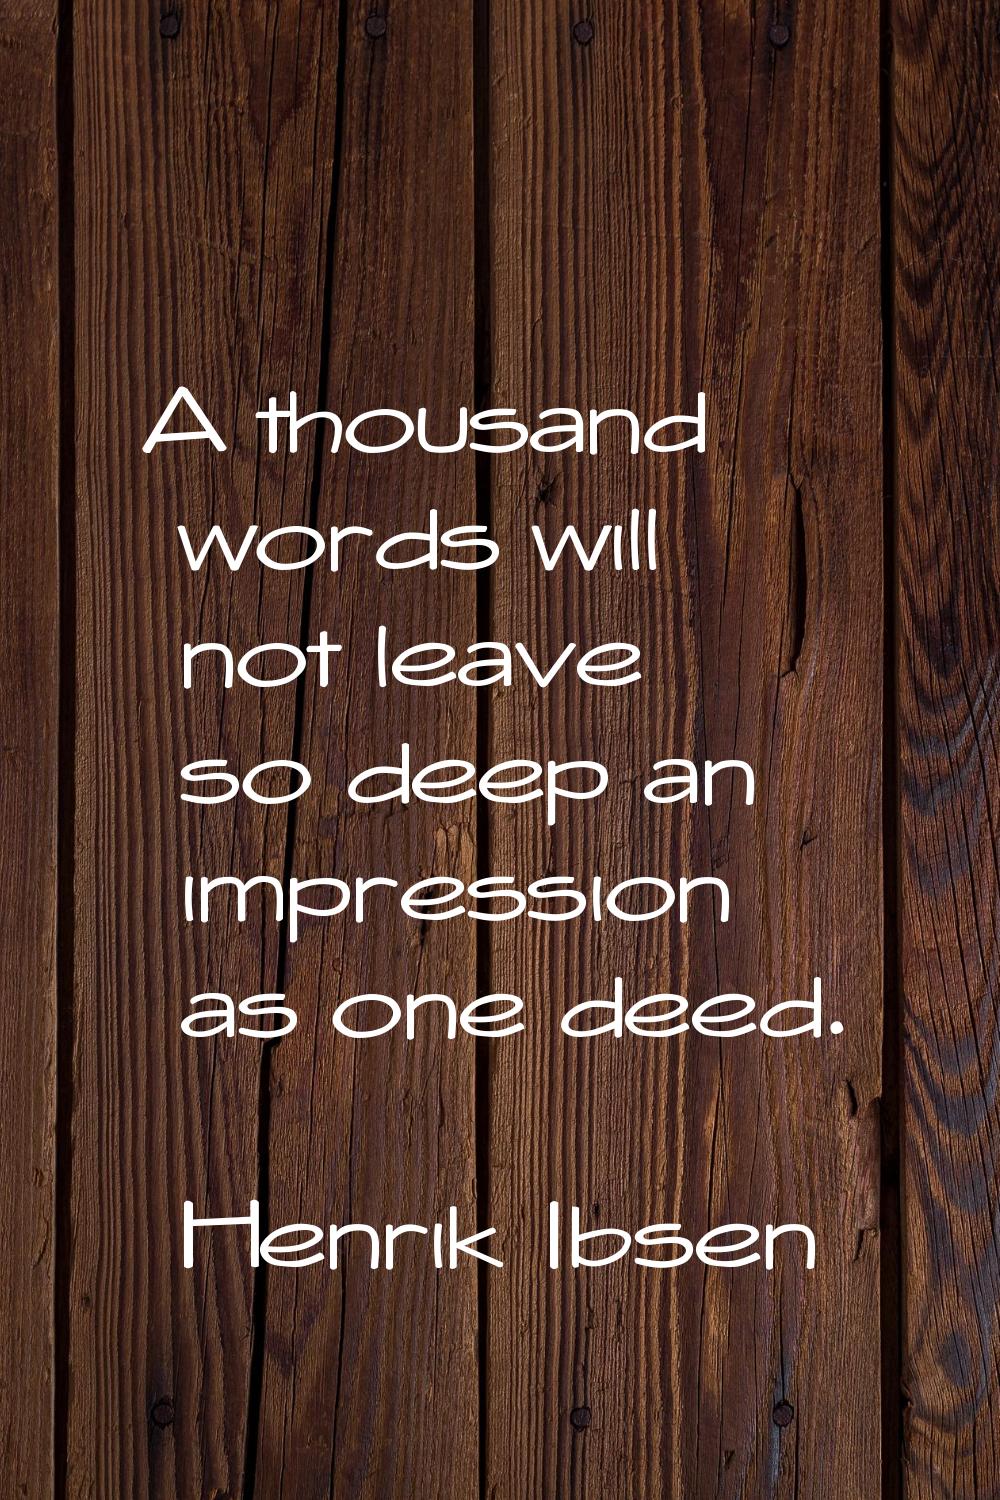 A thousand words will not leave so deep an impression as one deed.